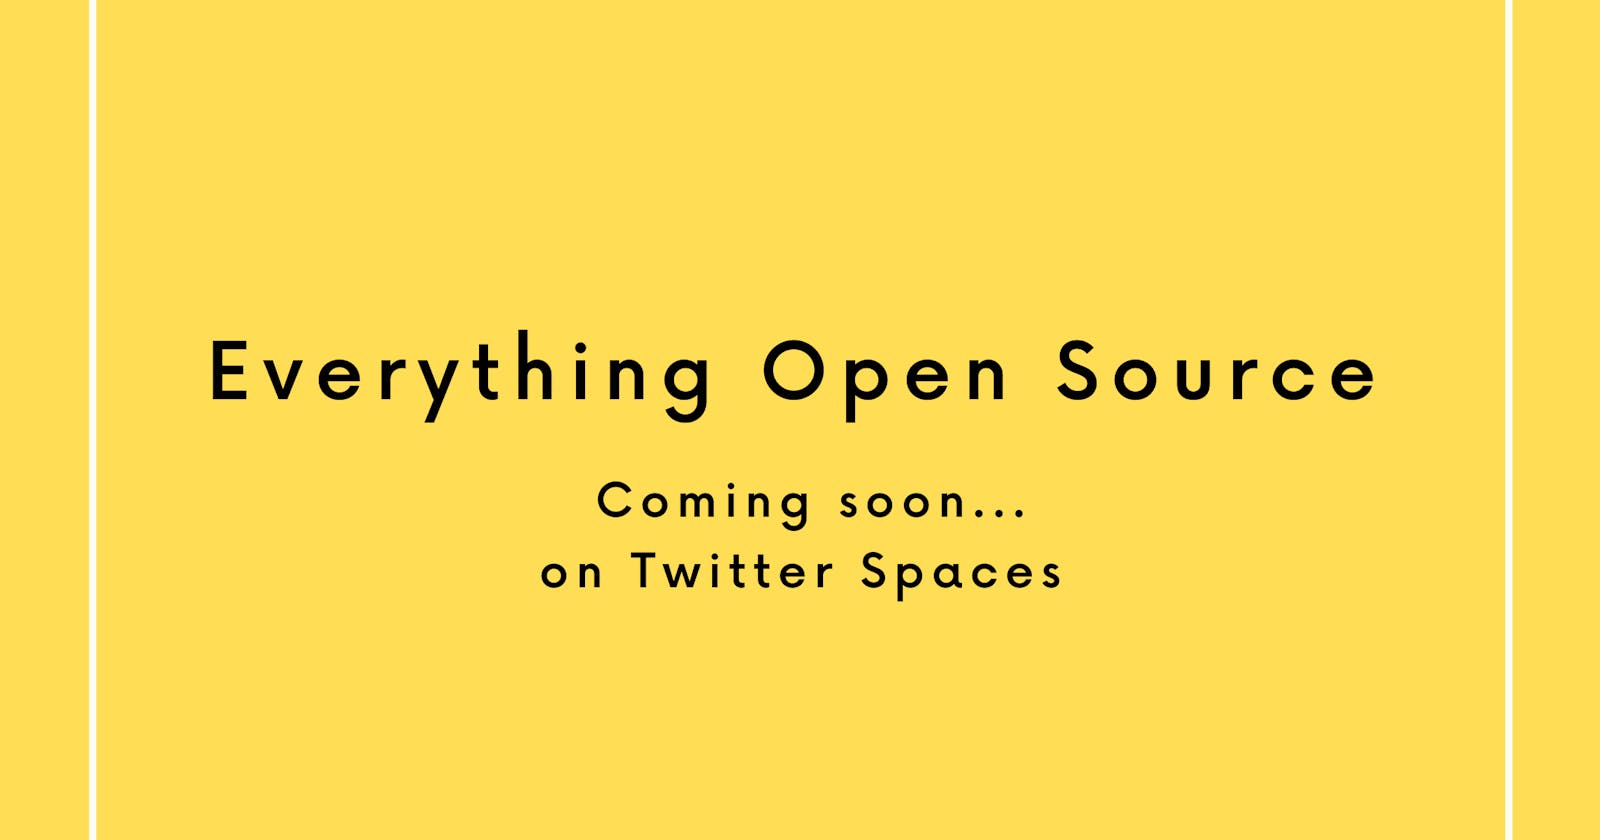 Introducing "Everything Open Source" by Mesrenyame